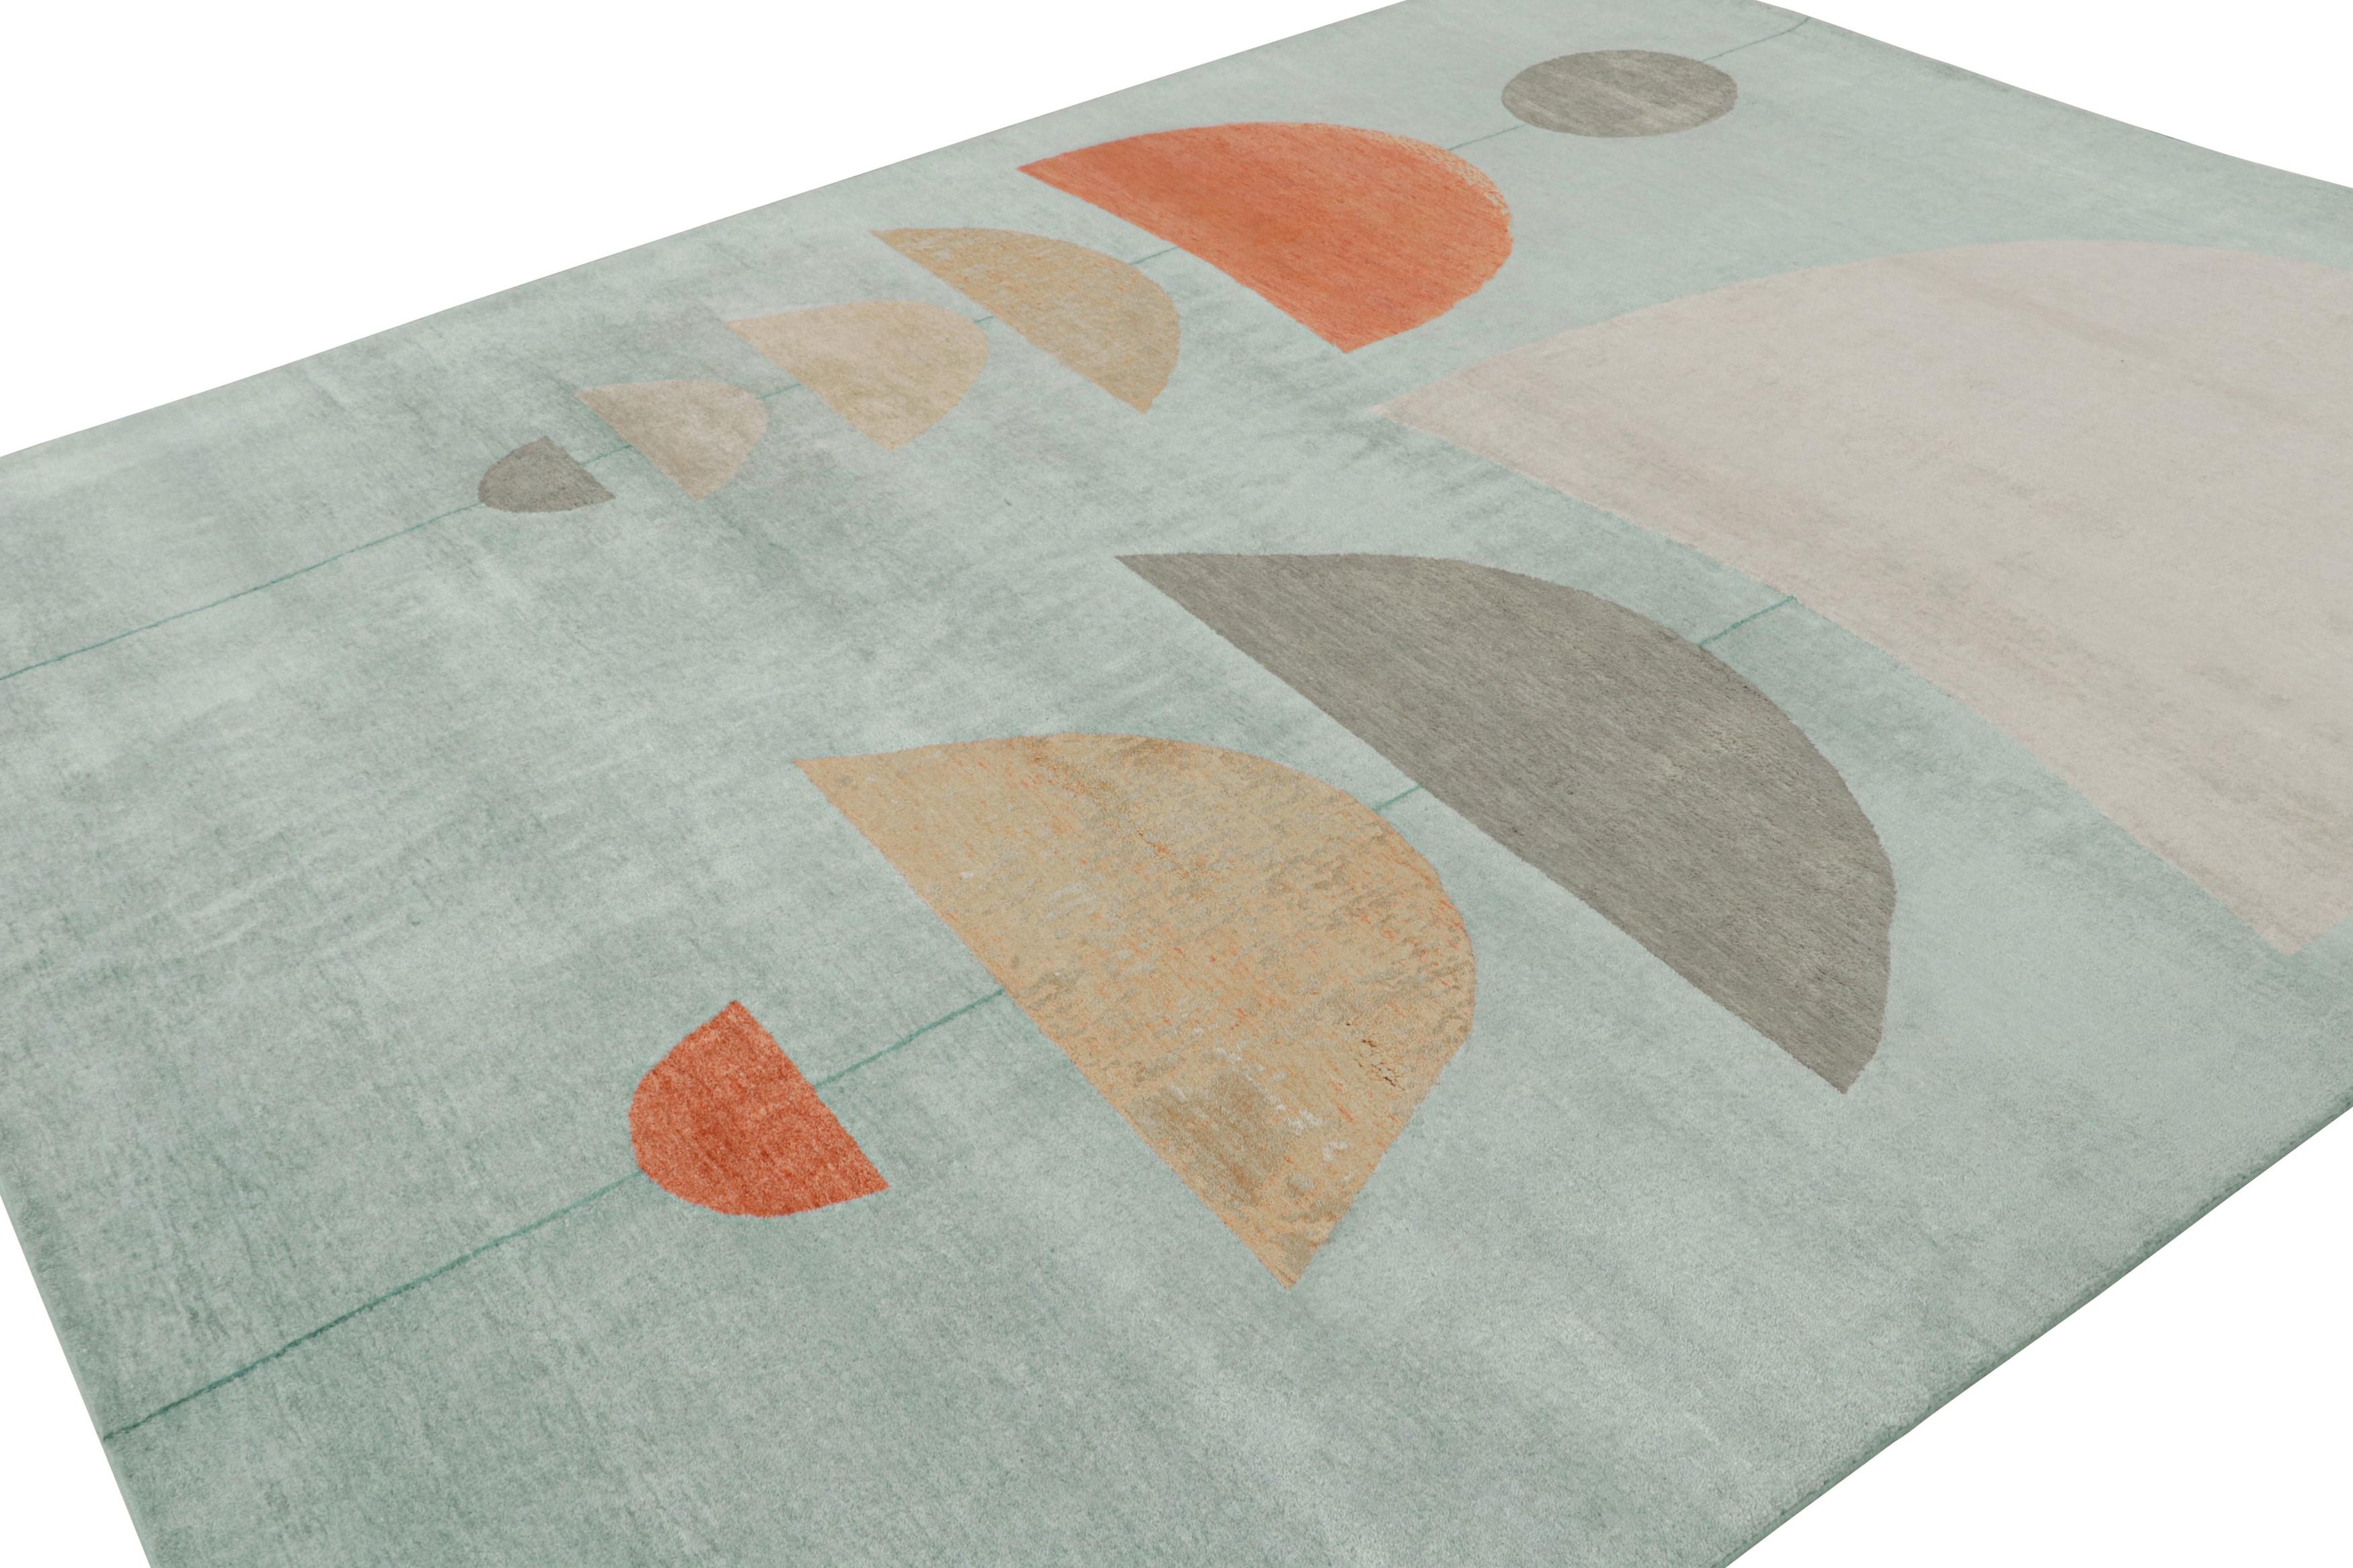 This 8x10 rug is from Rug & Kilim’s Mid-Century Modern collection in collaboration with Jenn Ski—hand-knotted in wool and silk.

On the Design

Keen eyes will admire light blue underscoring multicolor geometric patterns in the atomic age style.